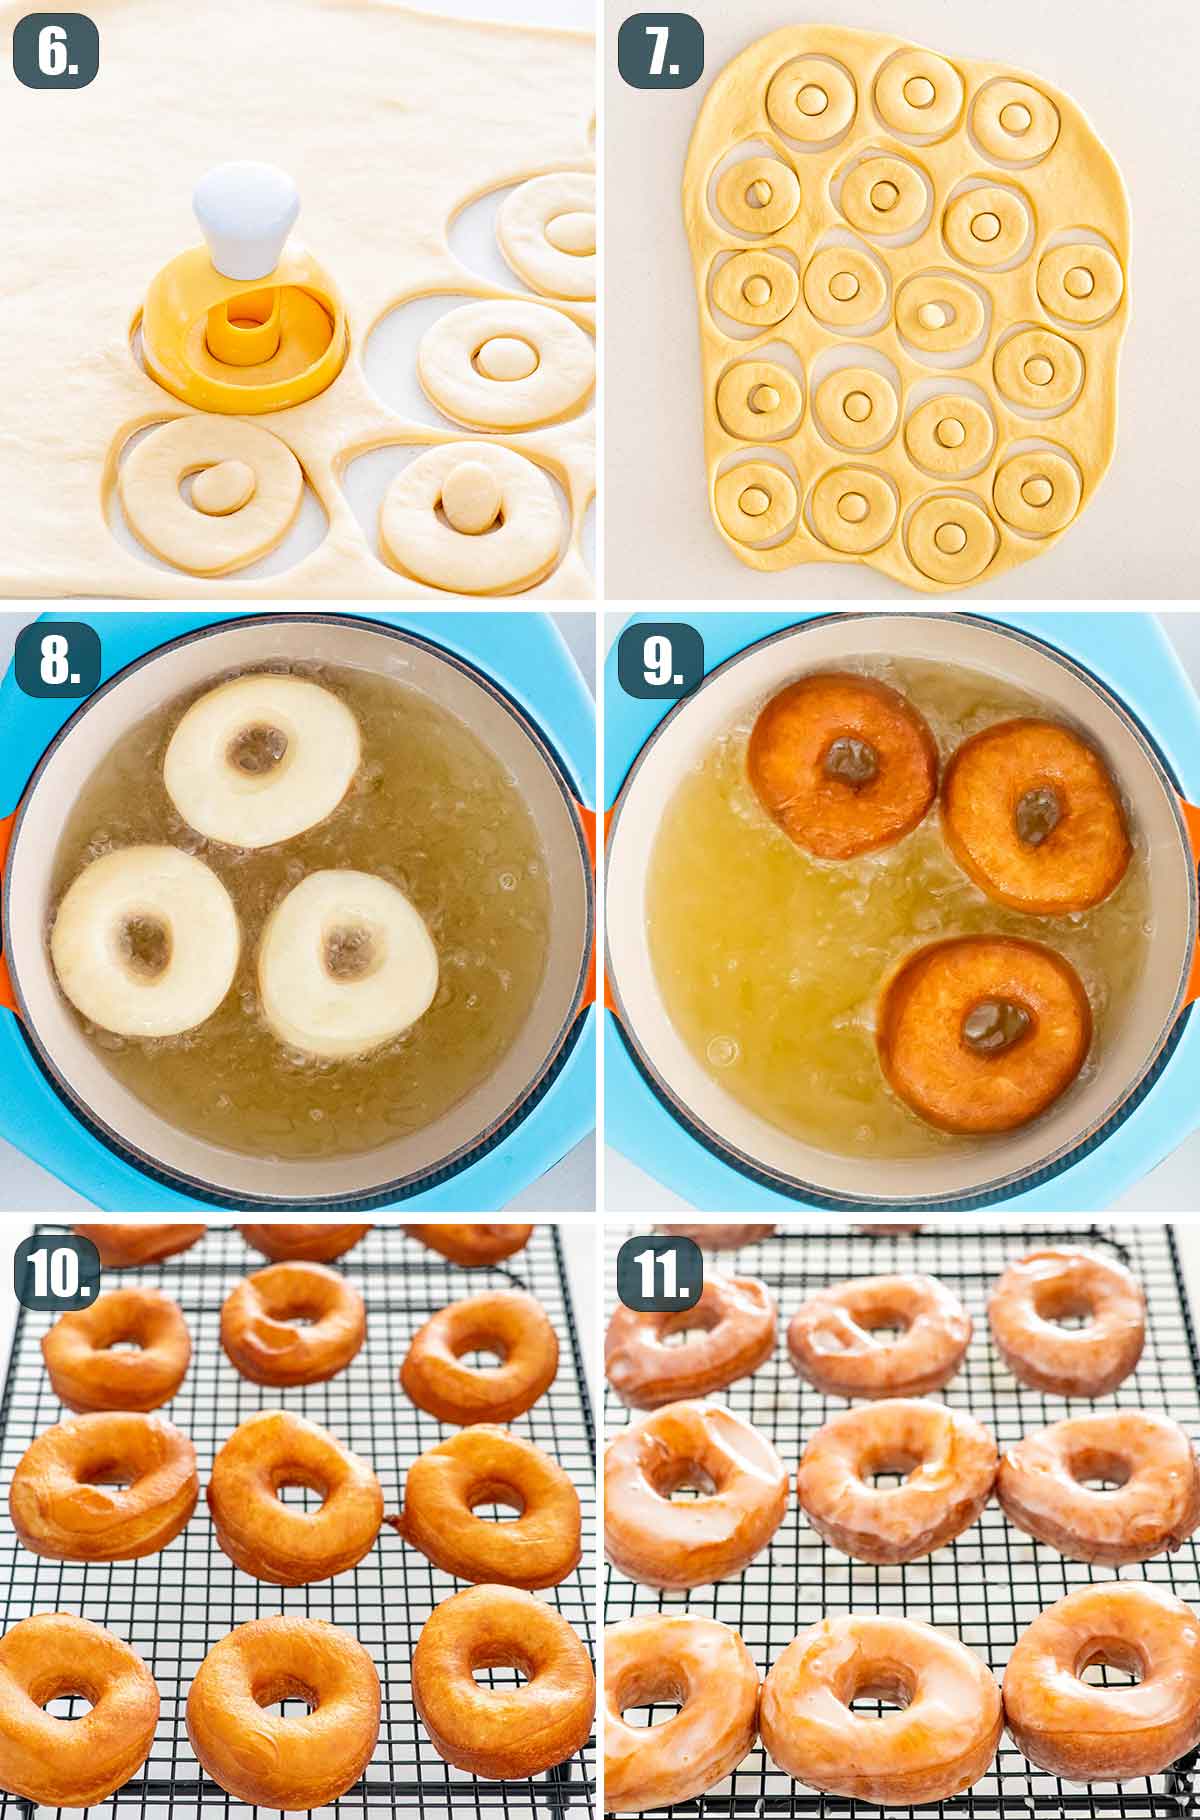 process shots showing how to cut, fry and glaze donuts.